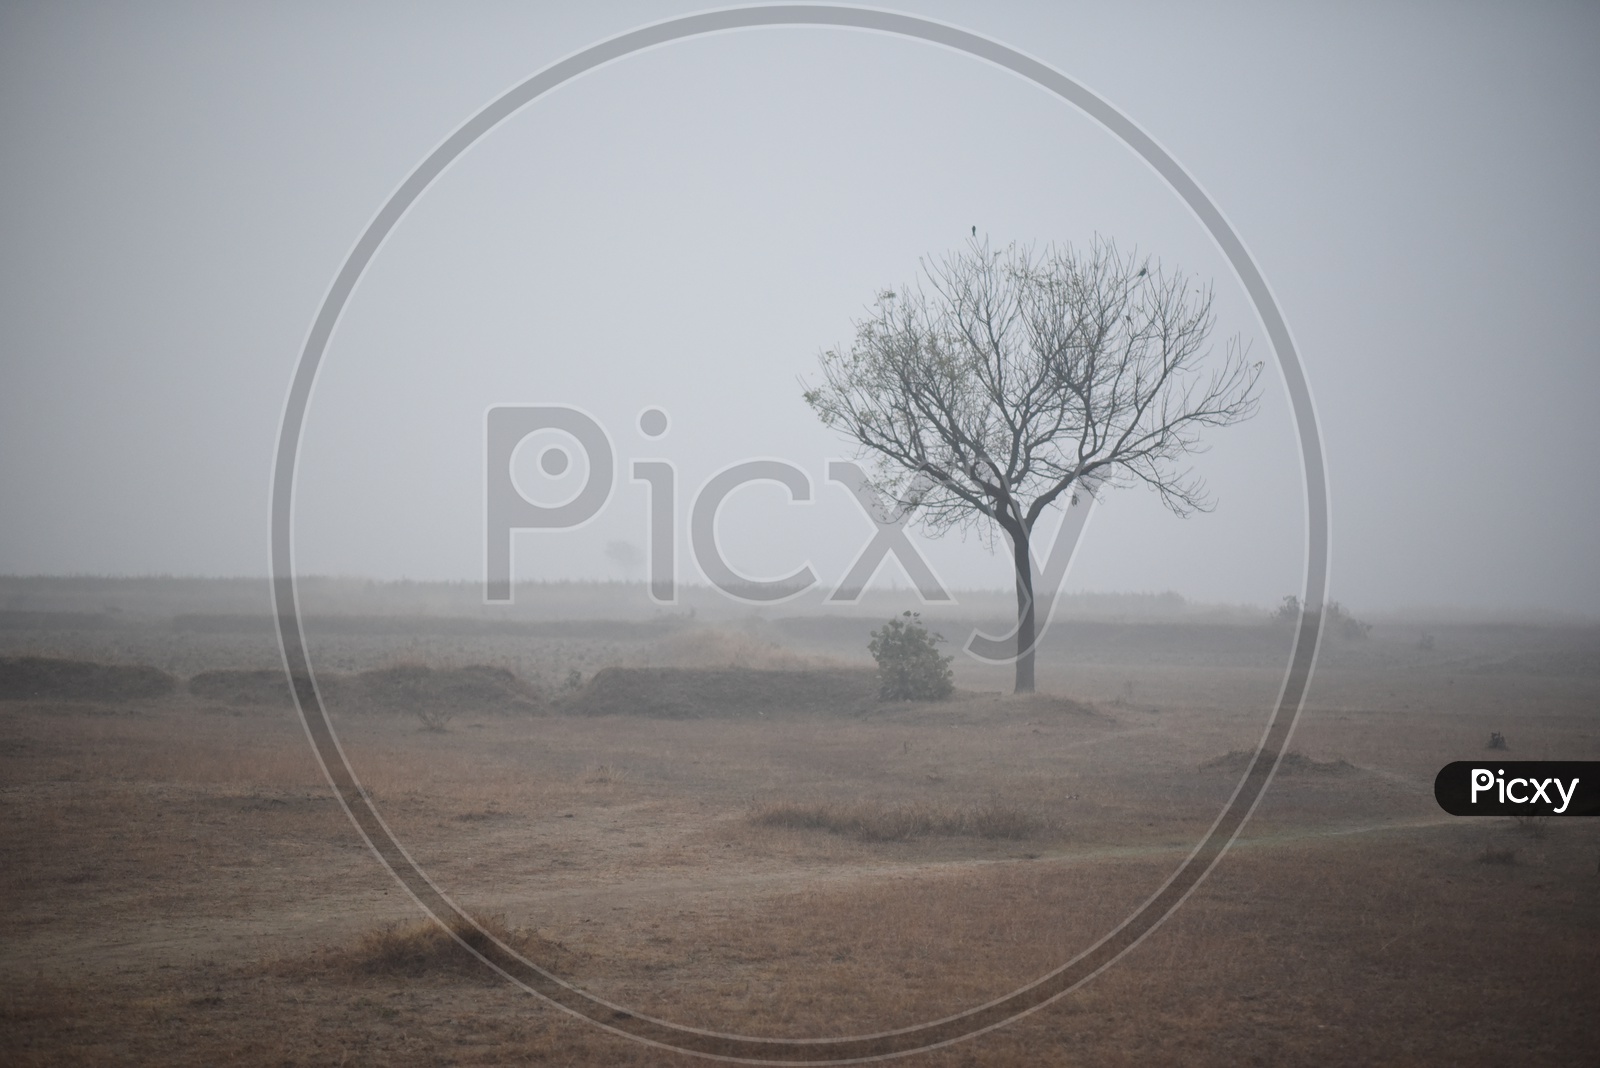 A Lone Leafless Tree In Barren Lands With Morning Mist All Around